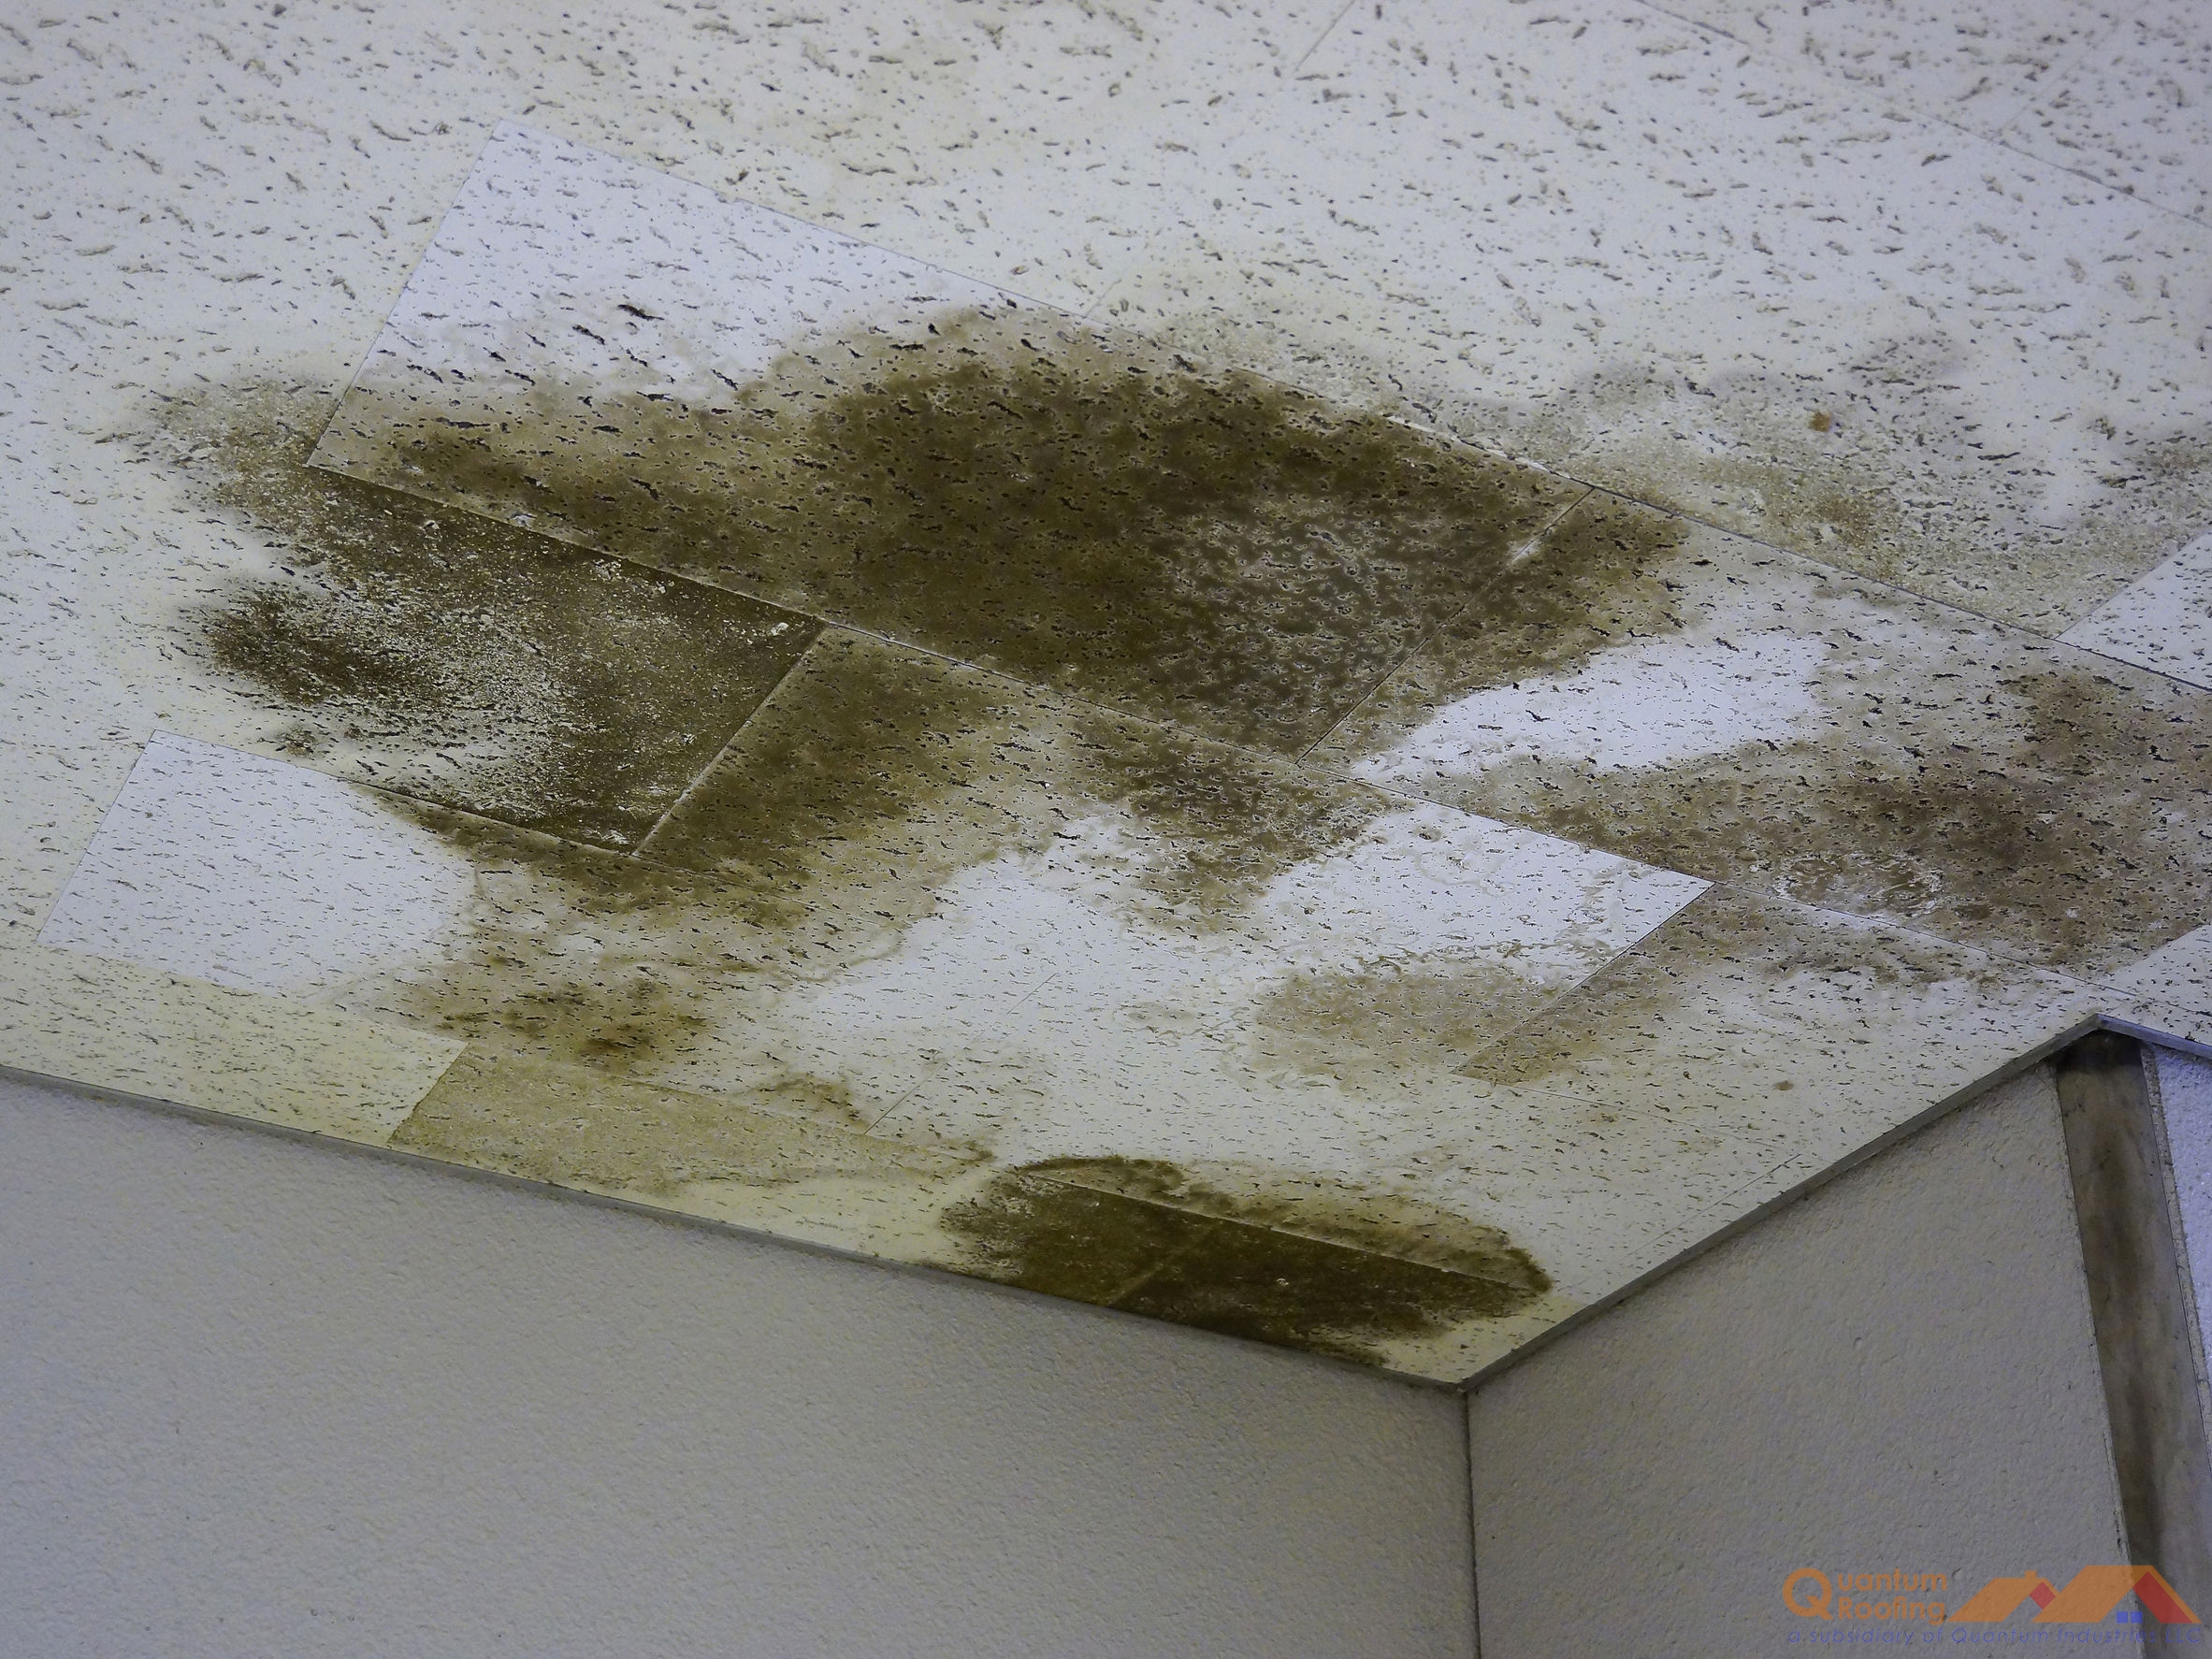 What Kind Of Damage Can a Roof Leak Do?